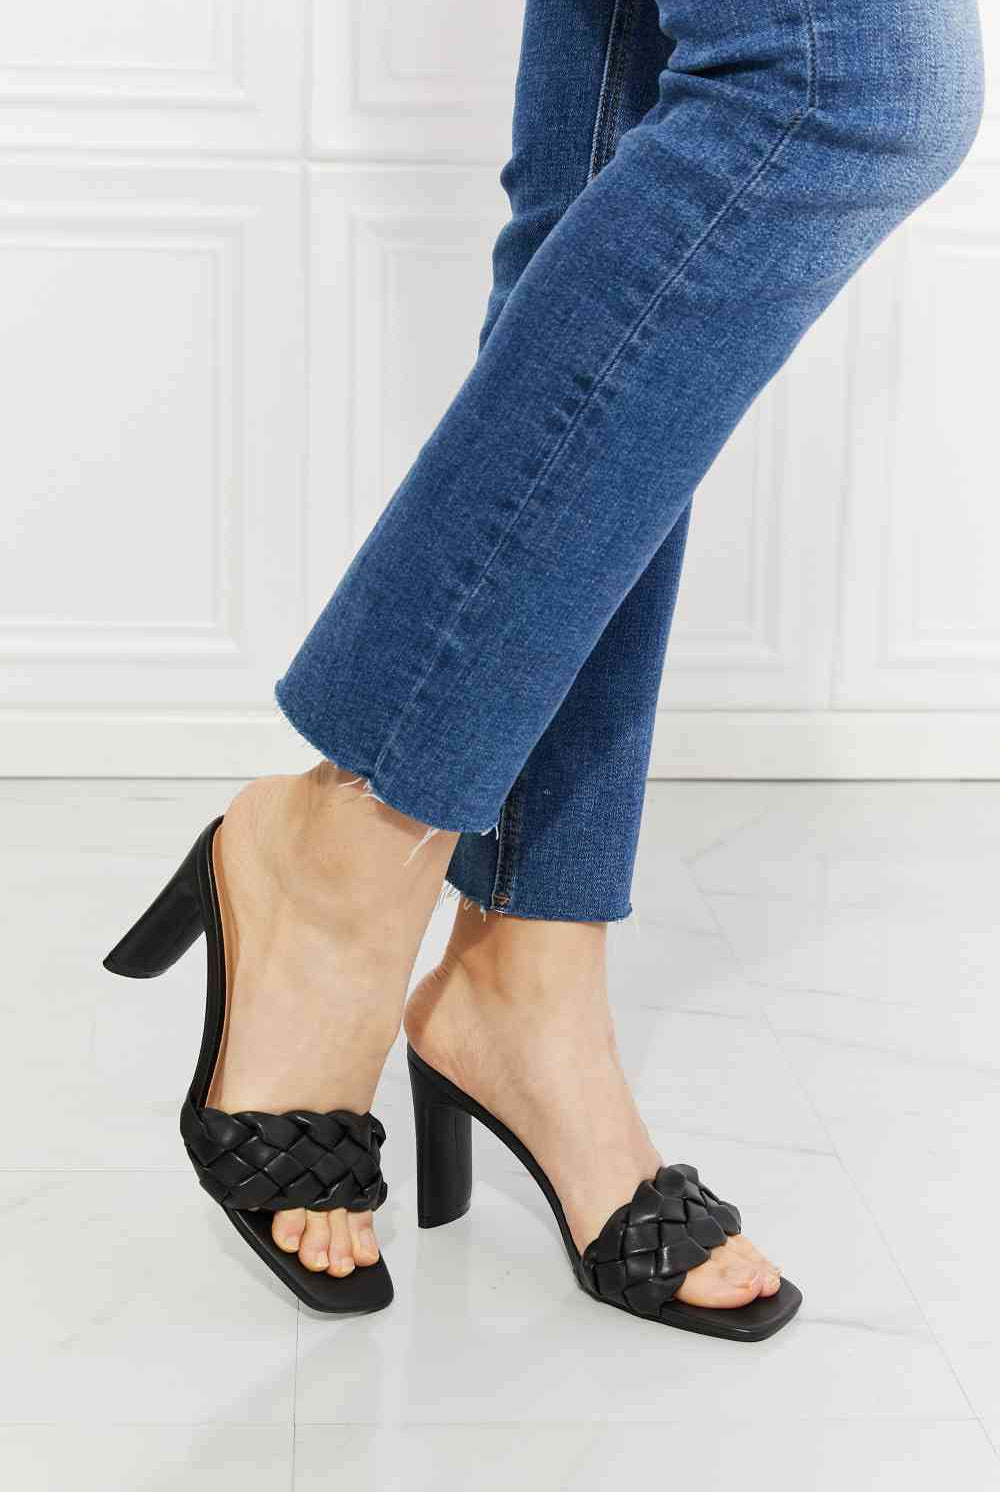 Dark Slate Gray MMShoes Top of the World Braided Block Heel Sandals in Black Shoes